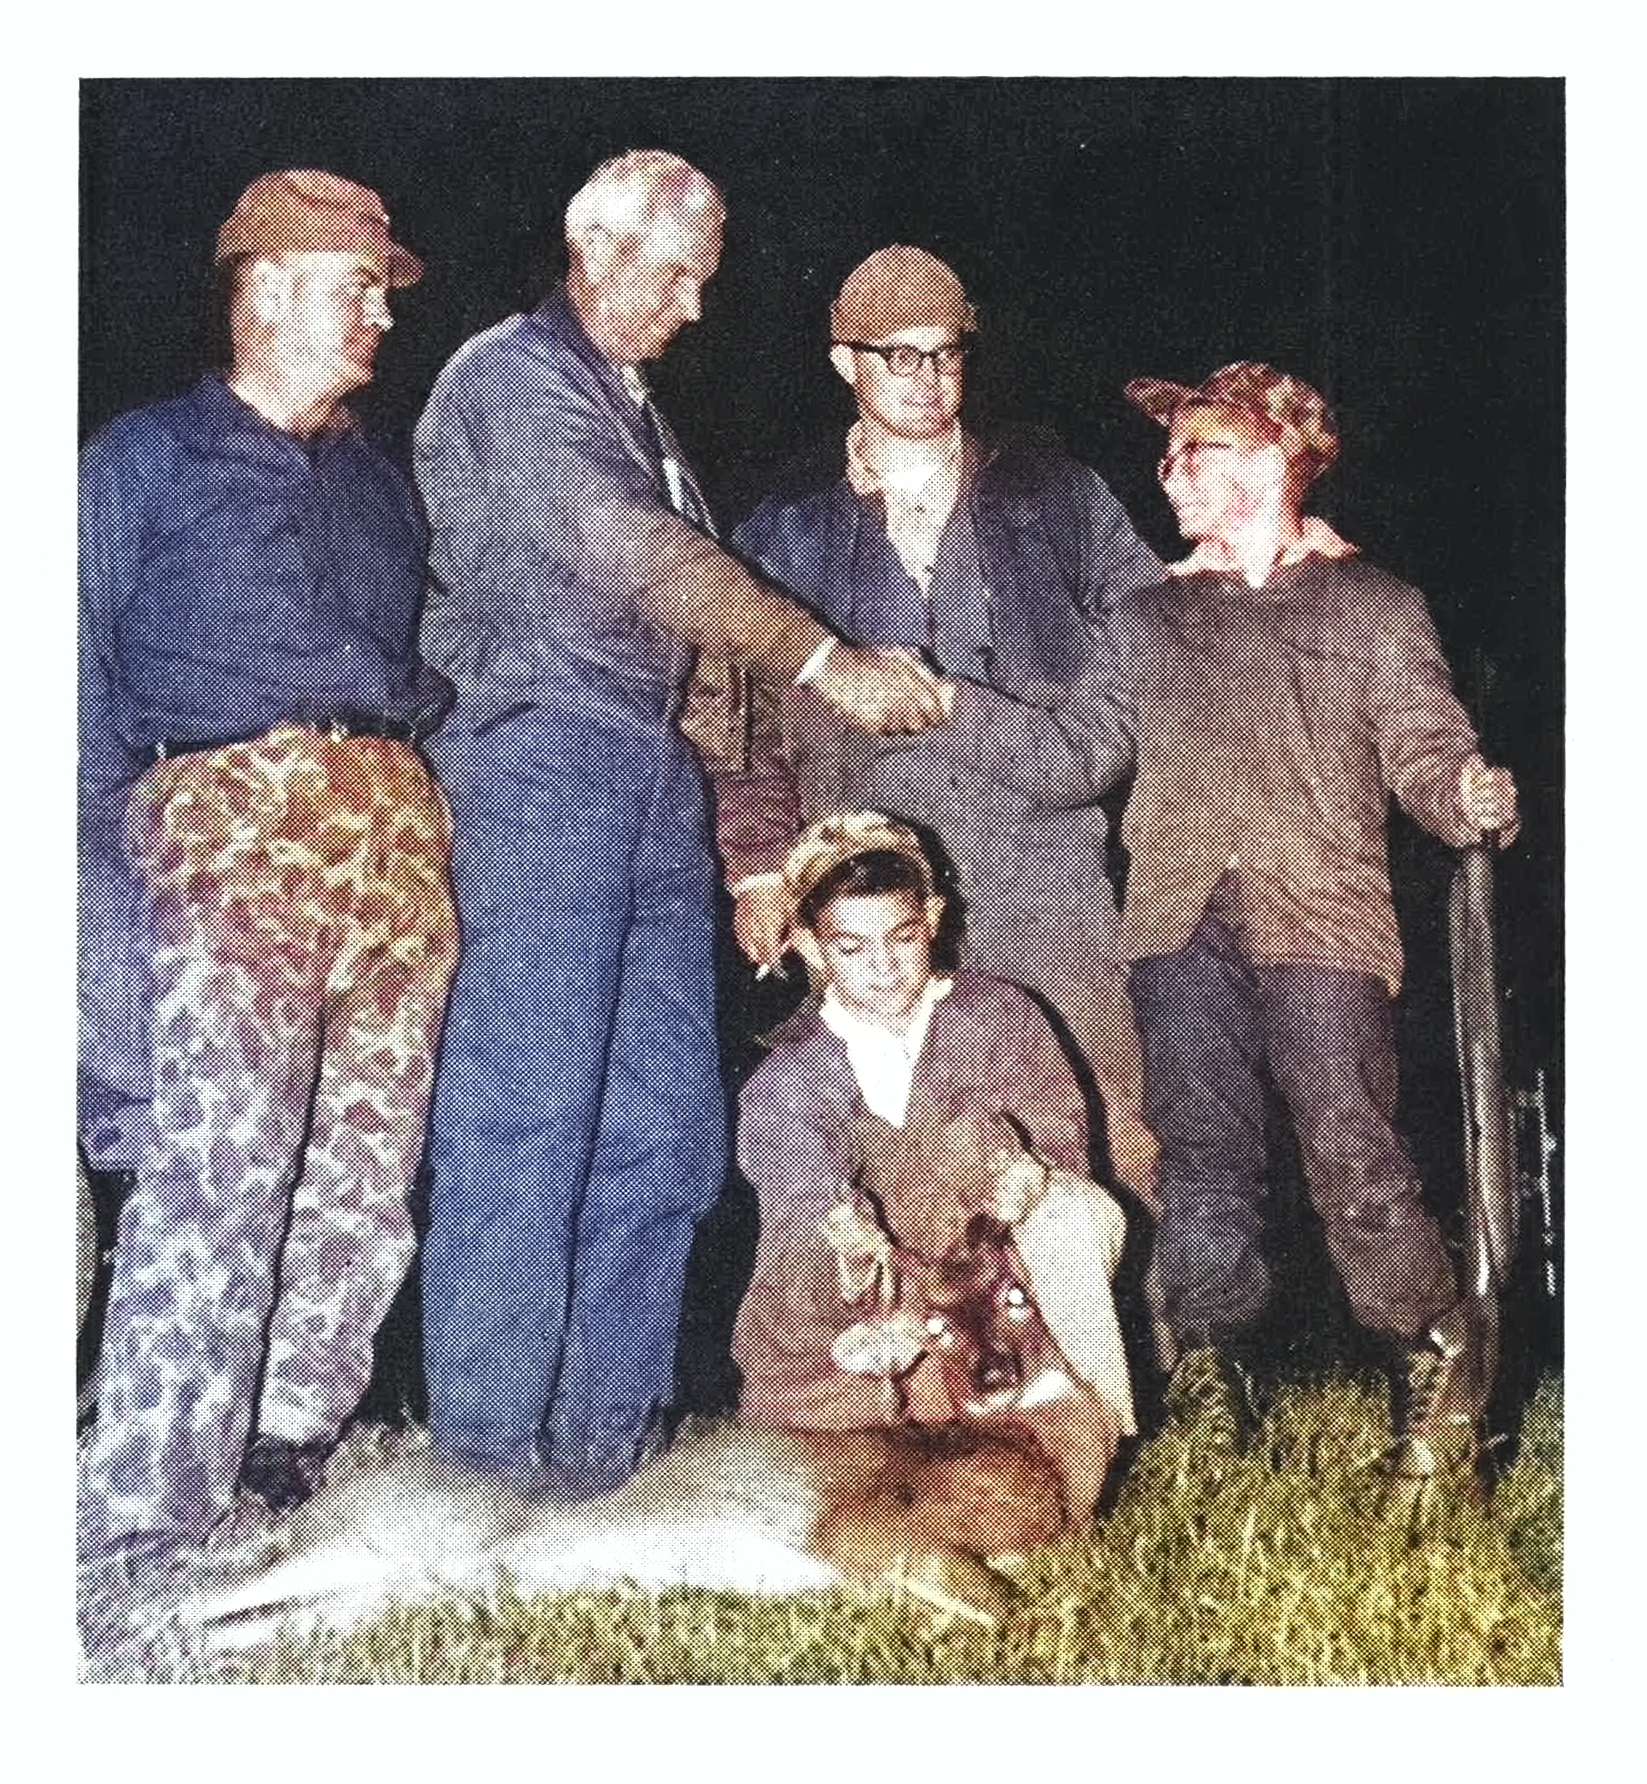 A group of hunters congratulate a kid on his first deer.